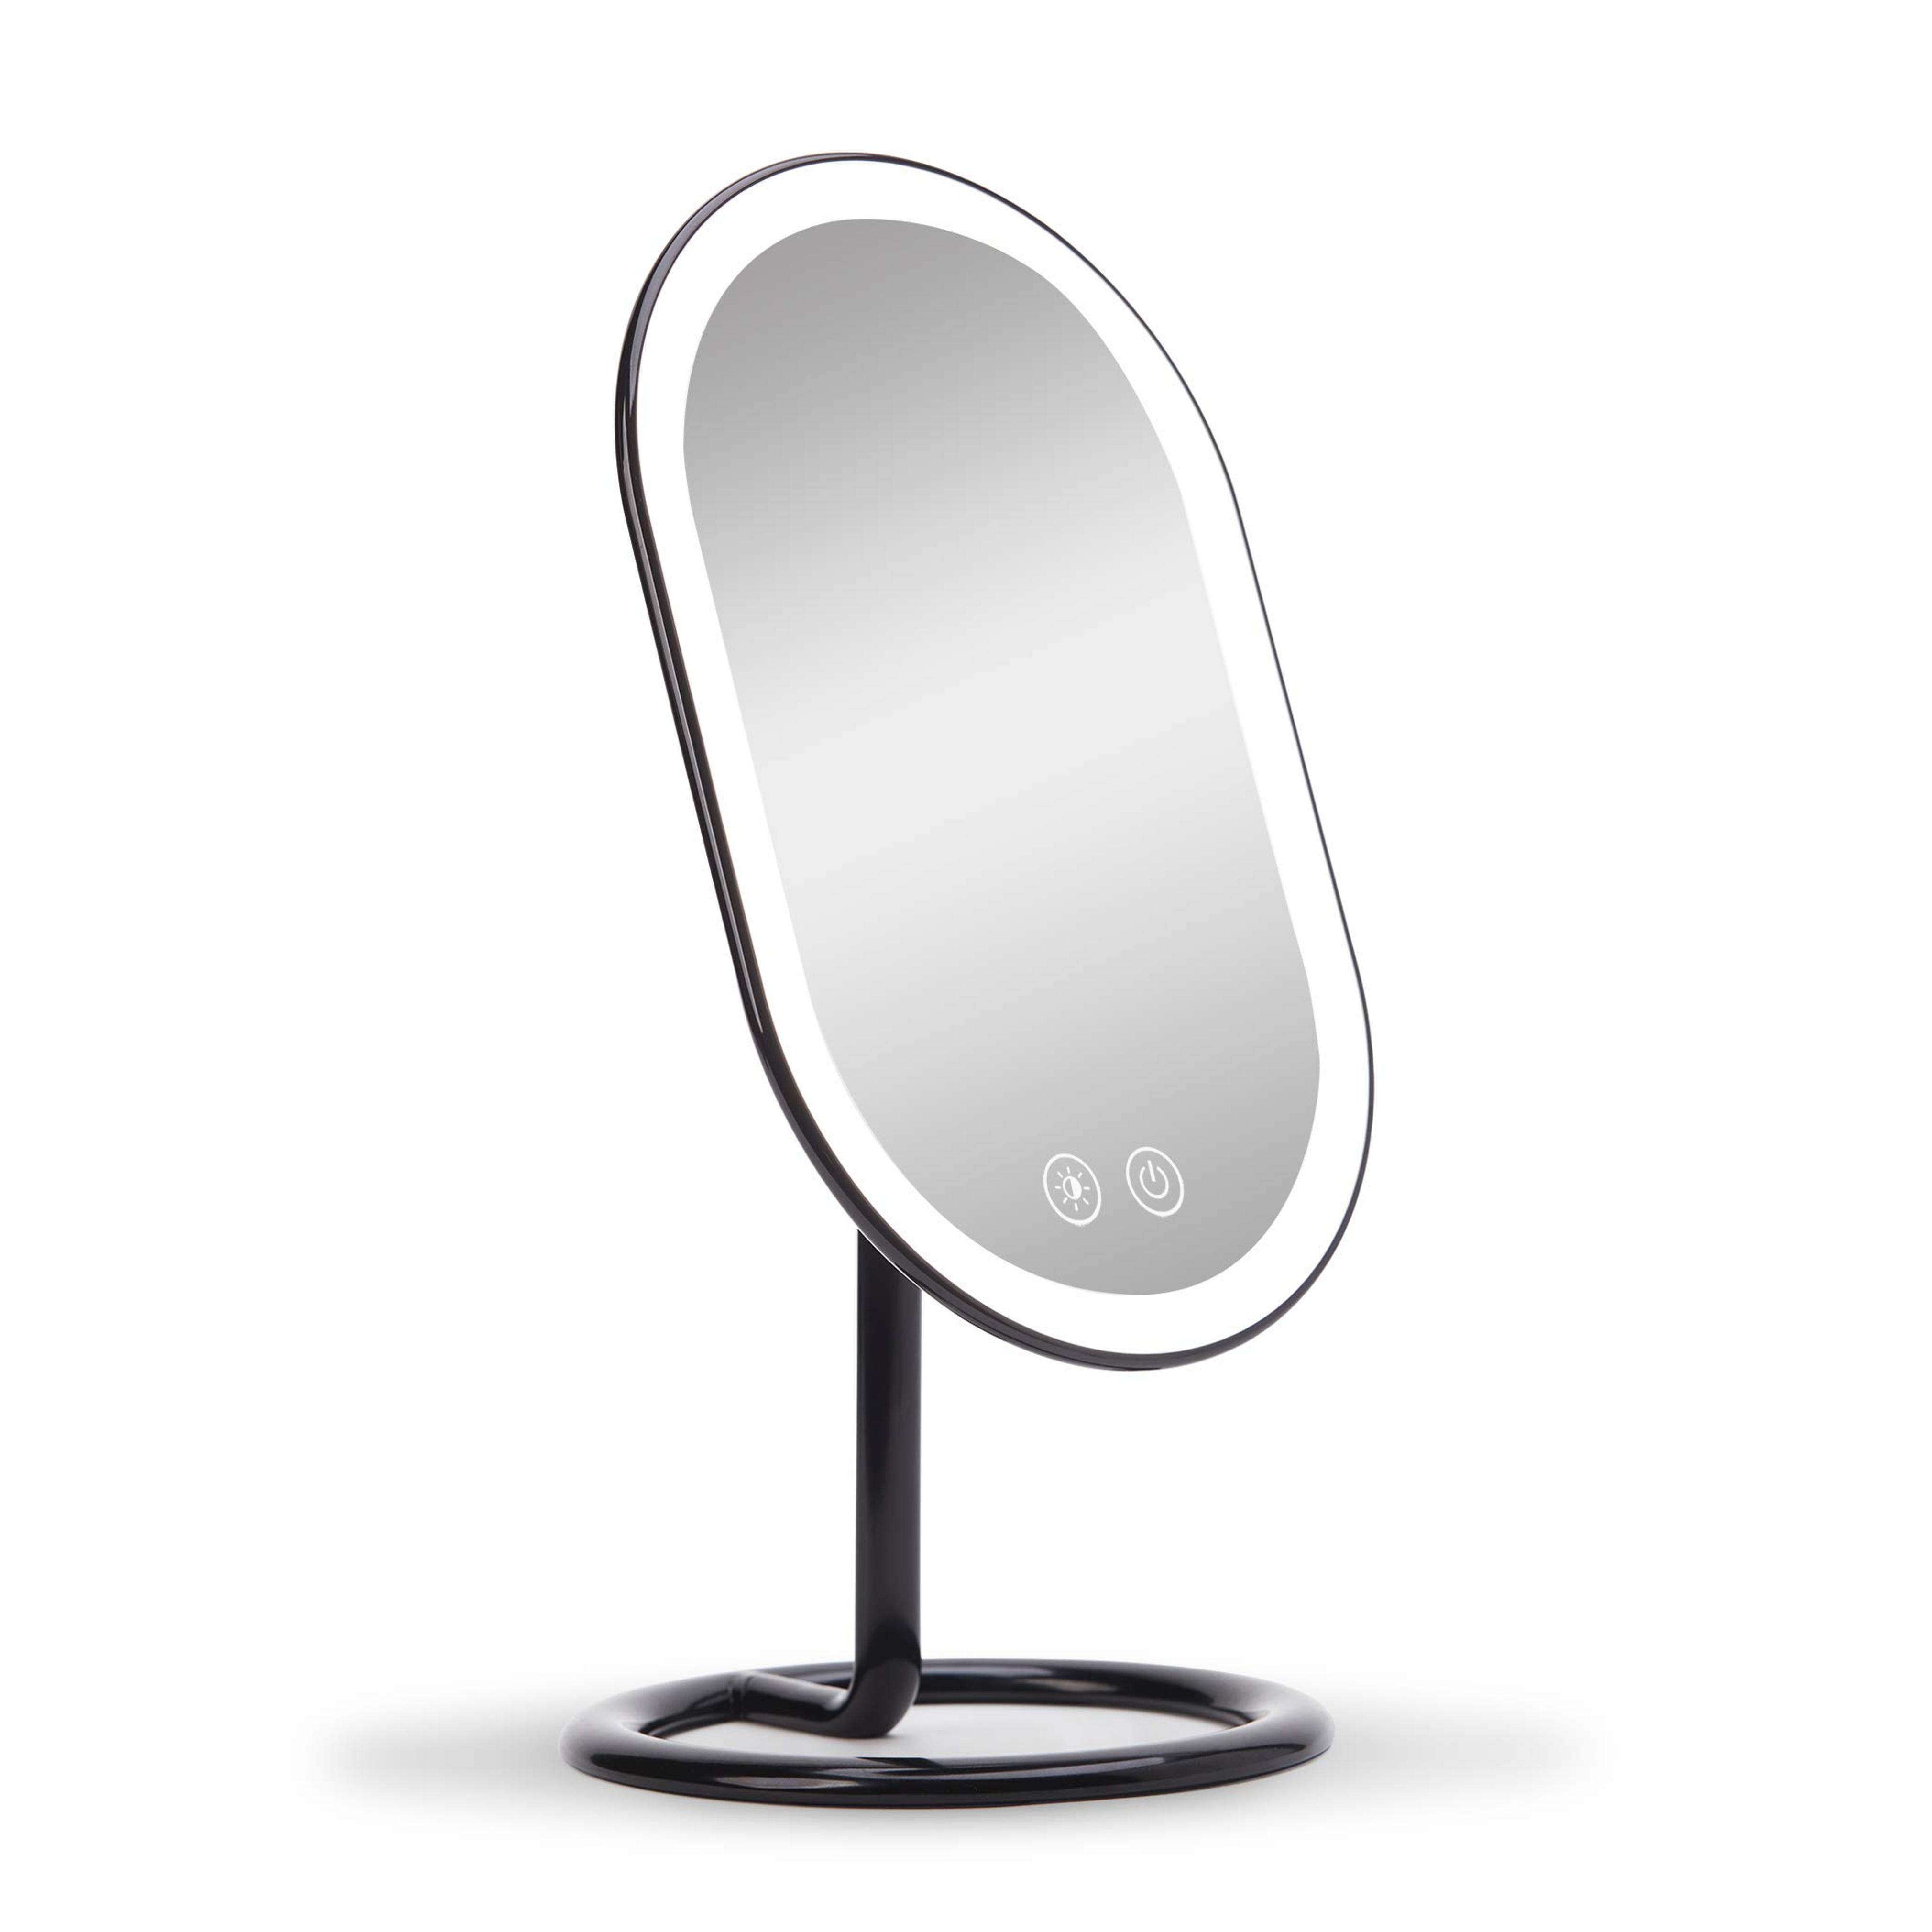 Fancii LED Lighted Vanity Makeup Mirror, Rechargeable - Cordless Illuminated Cosmetic Mirror with 3 Dimmable Light Settings, Dual Magnification - Vera (Obsidian)